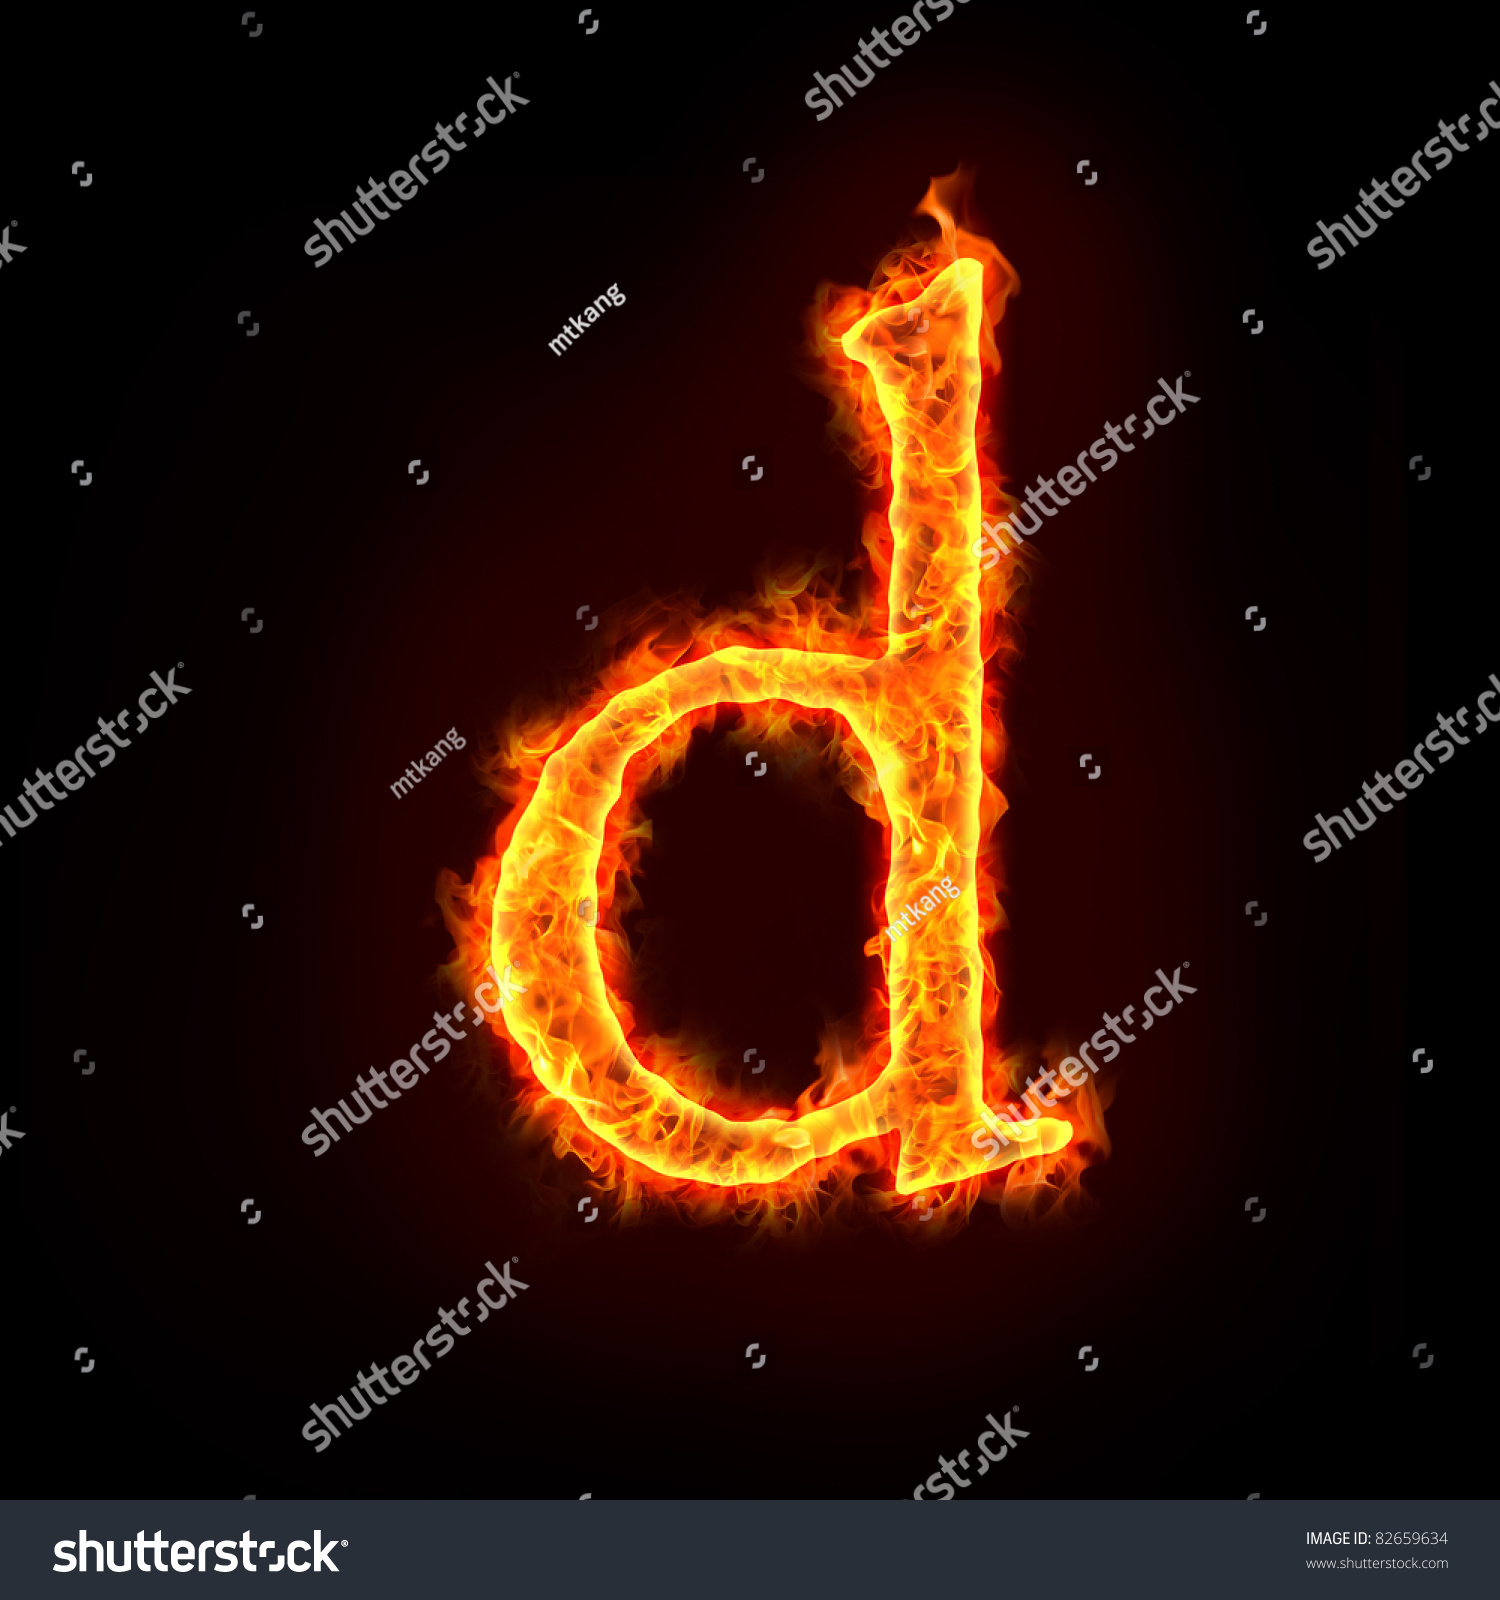 Fire Alphabets Flame Small Letter D Stock Illustration 82659634 ...